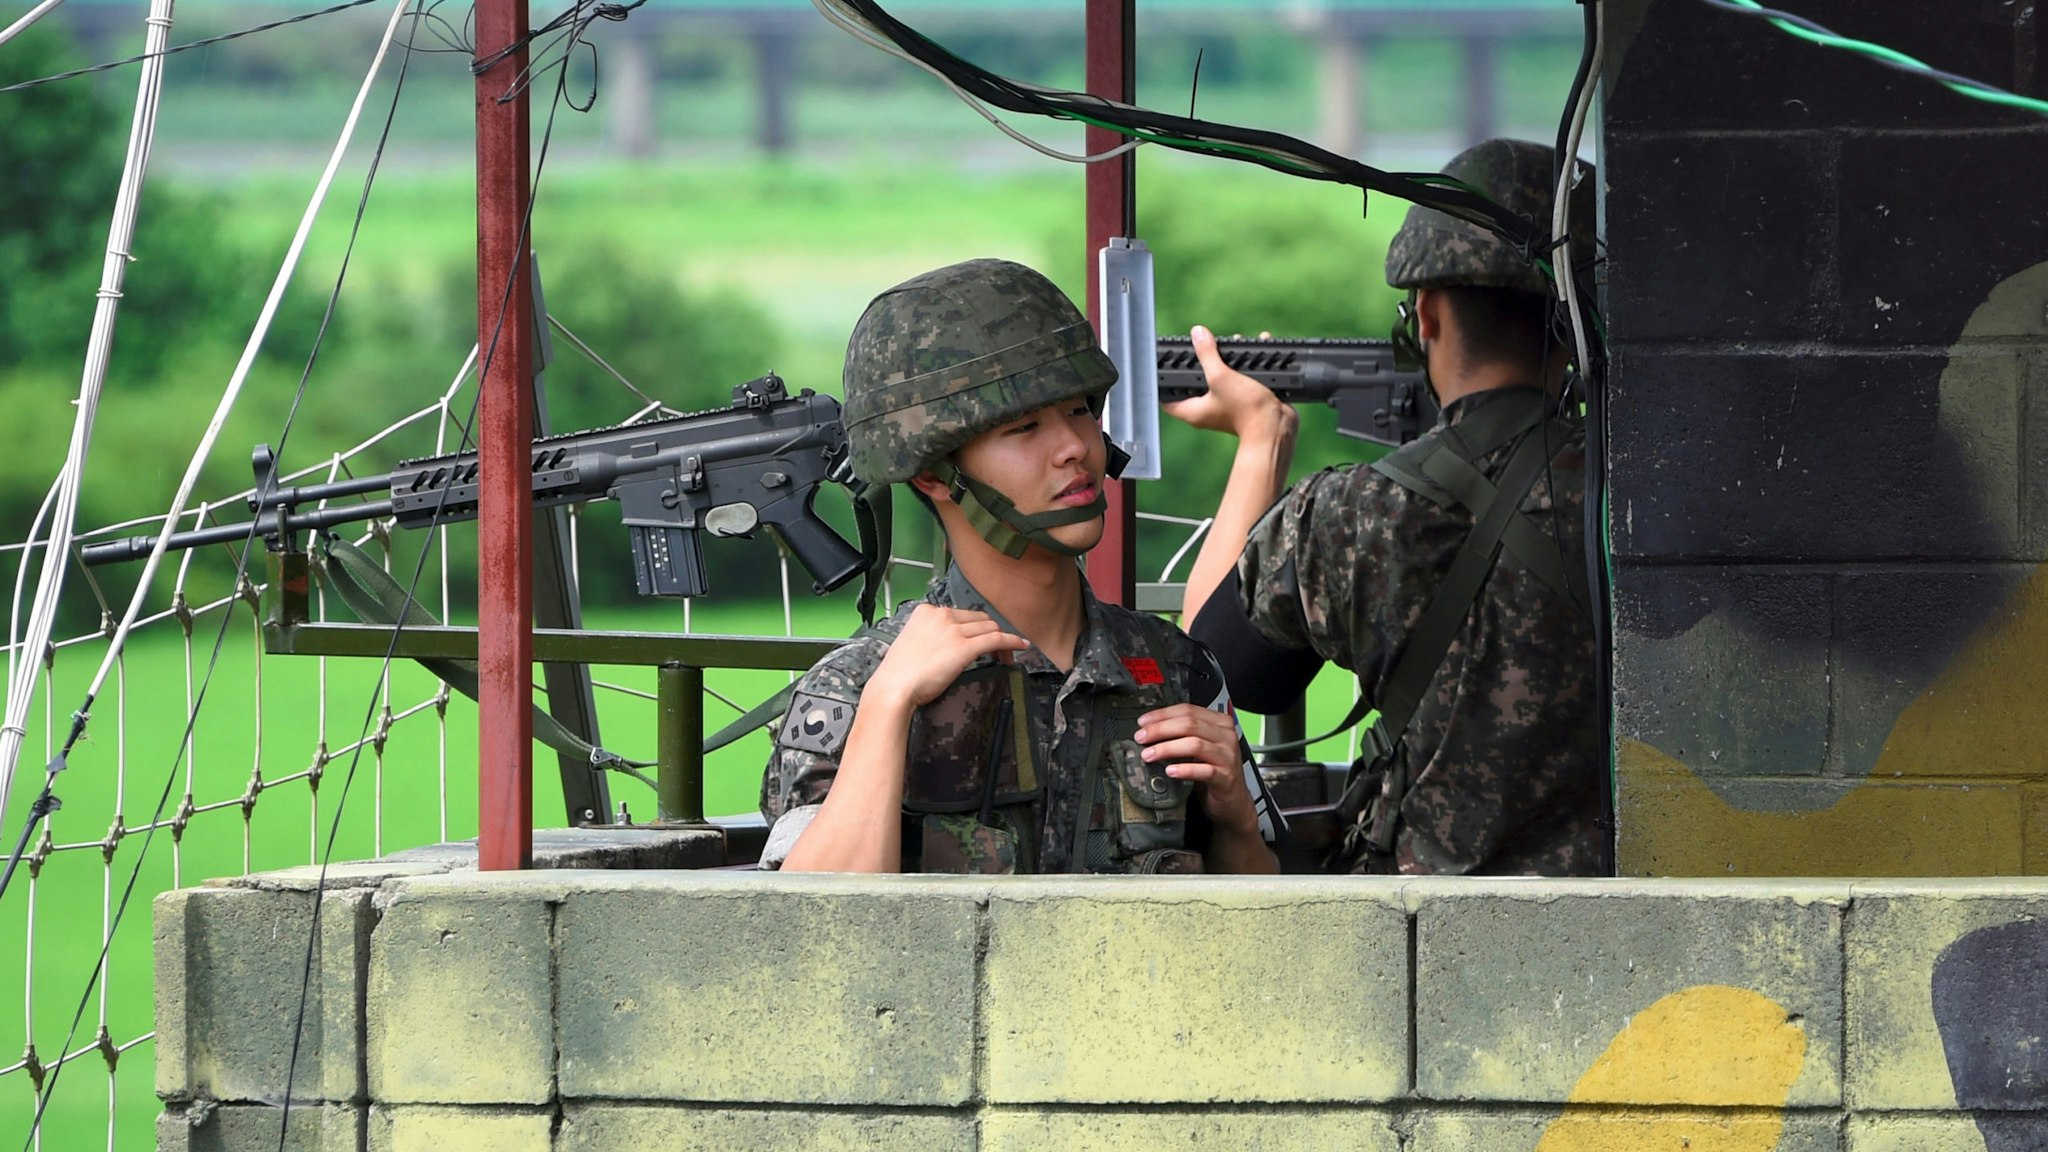 South Korean soldiers stand guard at a guard post near the Demilitarized Zone (DMZ) dividing two Koreas in the border city of Paju on August 11, 2017. As nuclear-armed North Korea's missile stand-off with the US escalates, calls are mounting in the South for Seoul to build nuclear weapons of its own to defend itself -- which would complicate the situation even further.